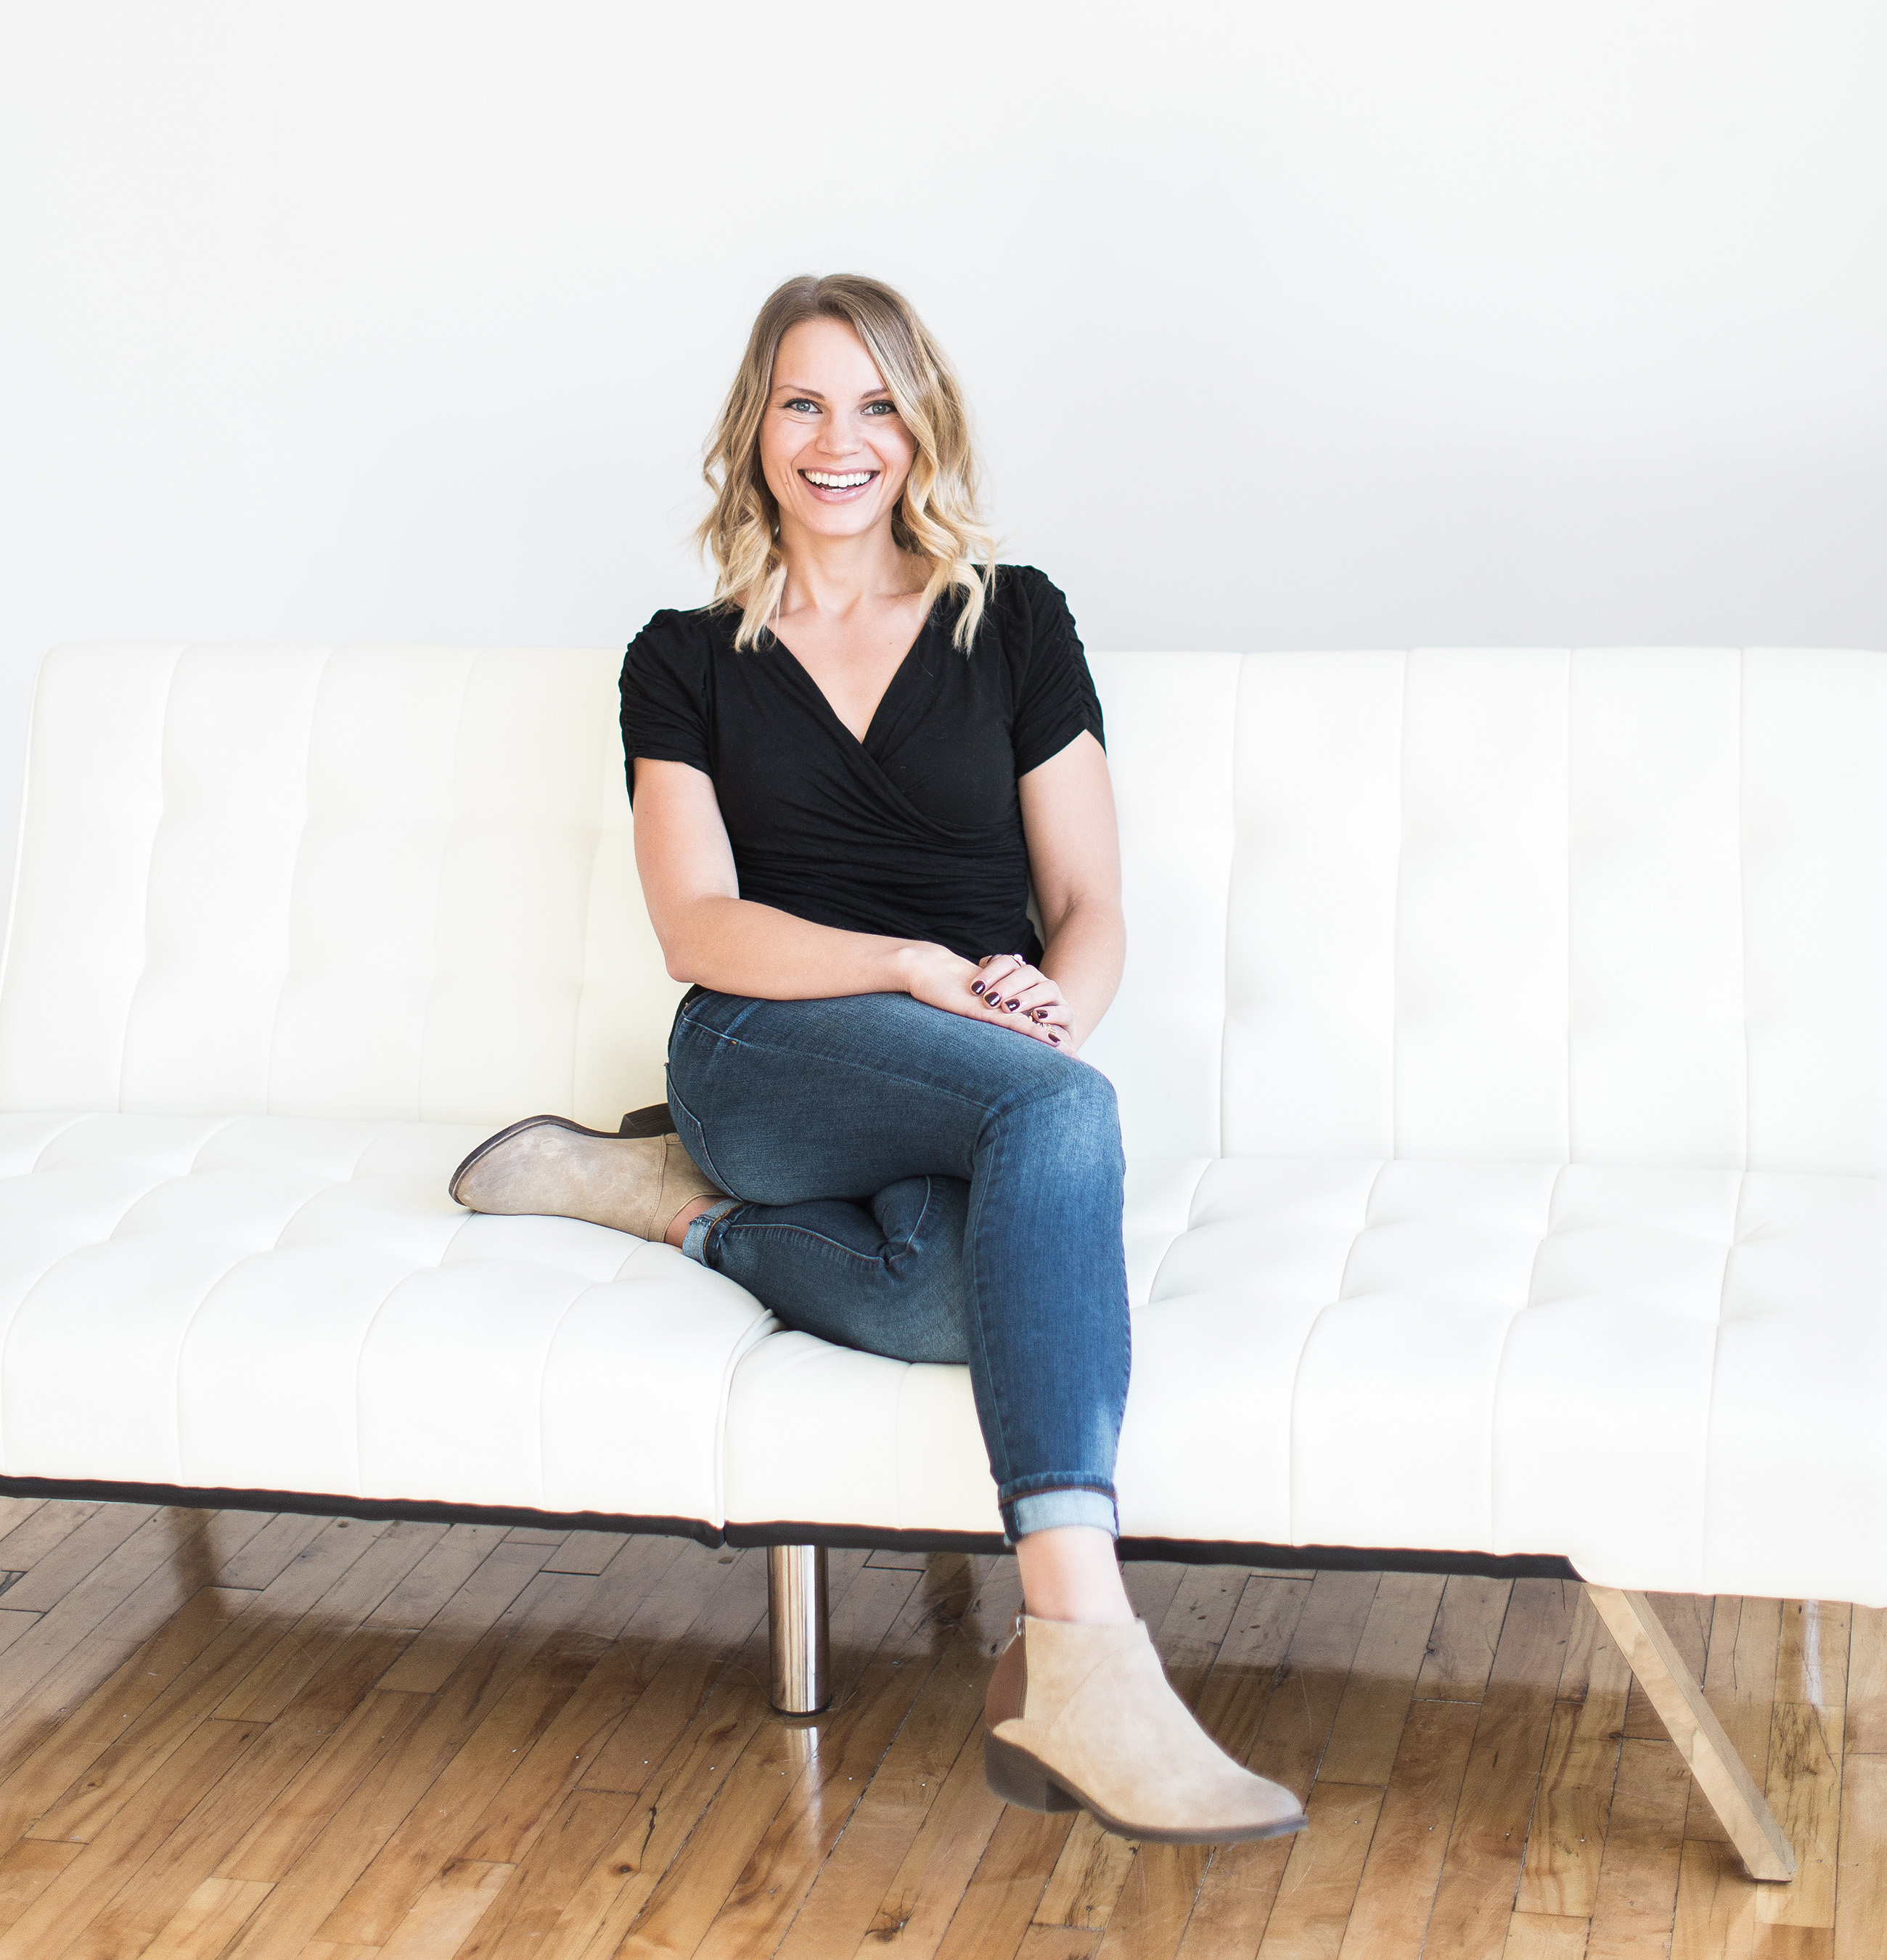 Monique Volz is the founder of Ambitious Kitchen, a site devoted to clean eating meals, better-for-you treats, and living an ambitious life.